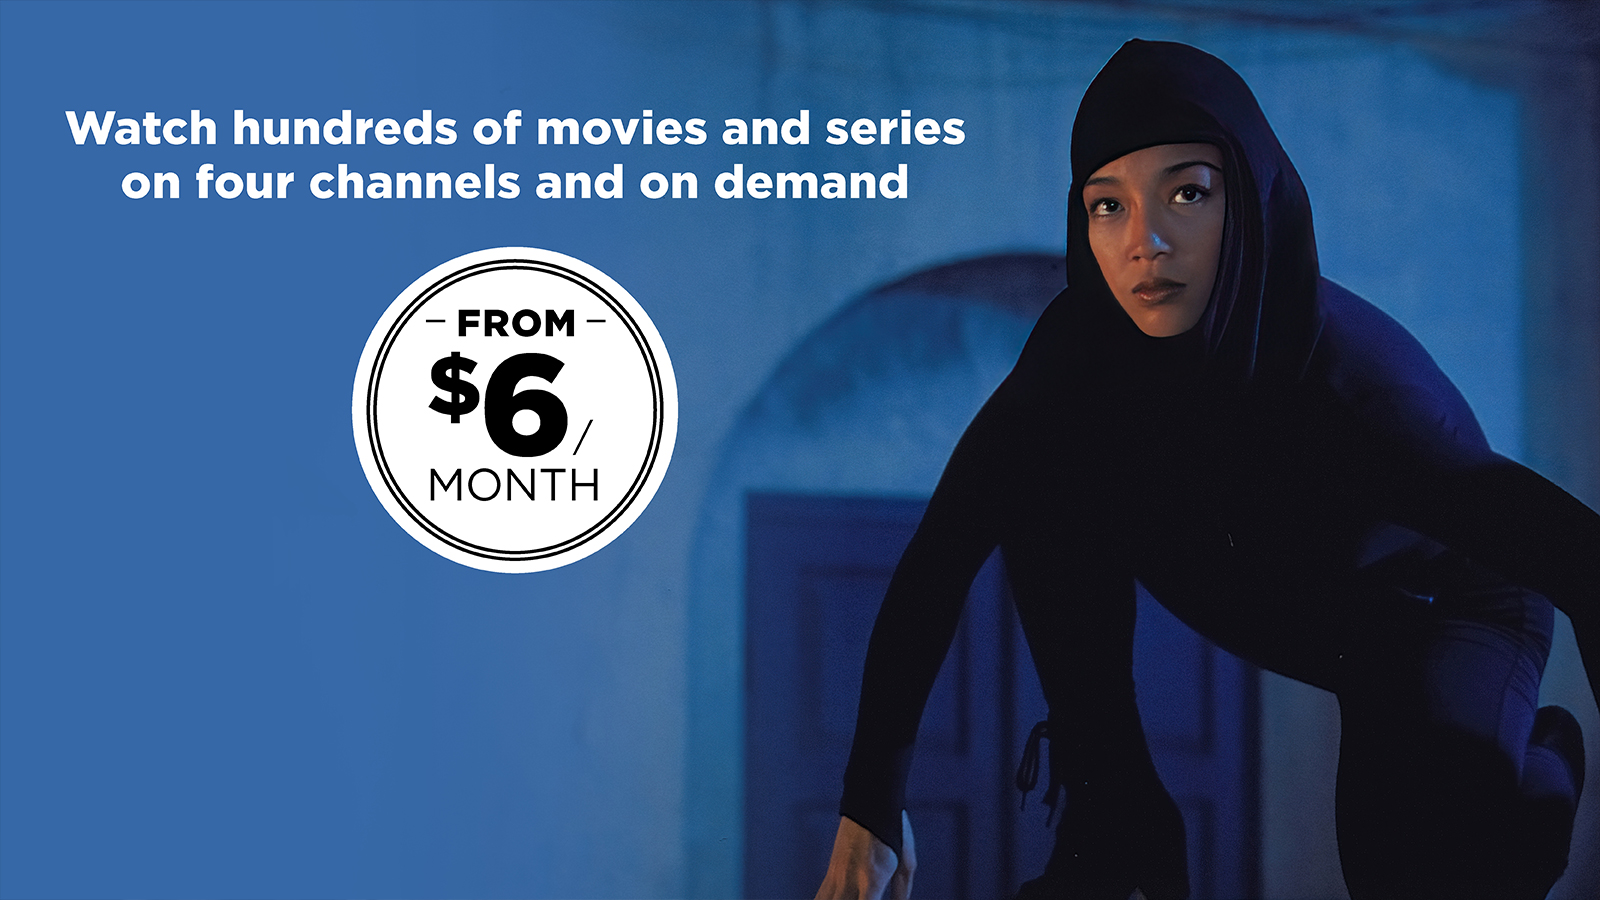 Watch hundreds of movies and series on 4 channels and on demand from $6 a month